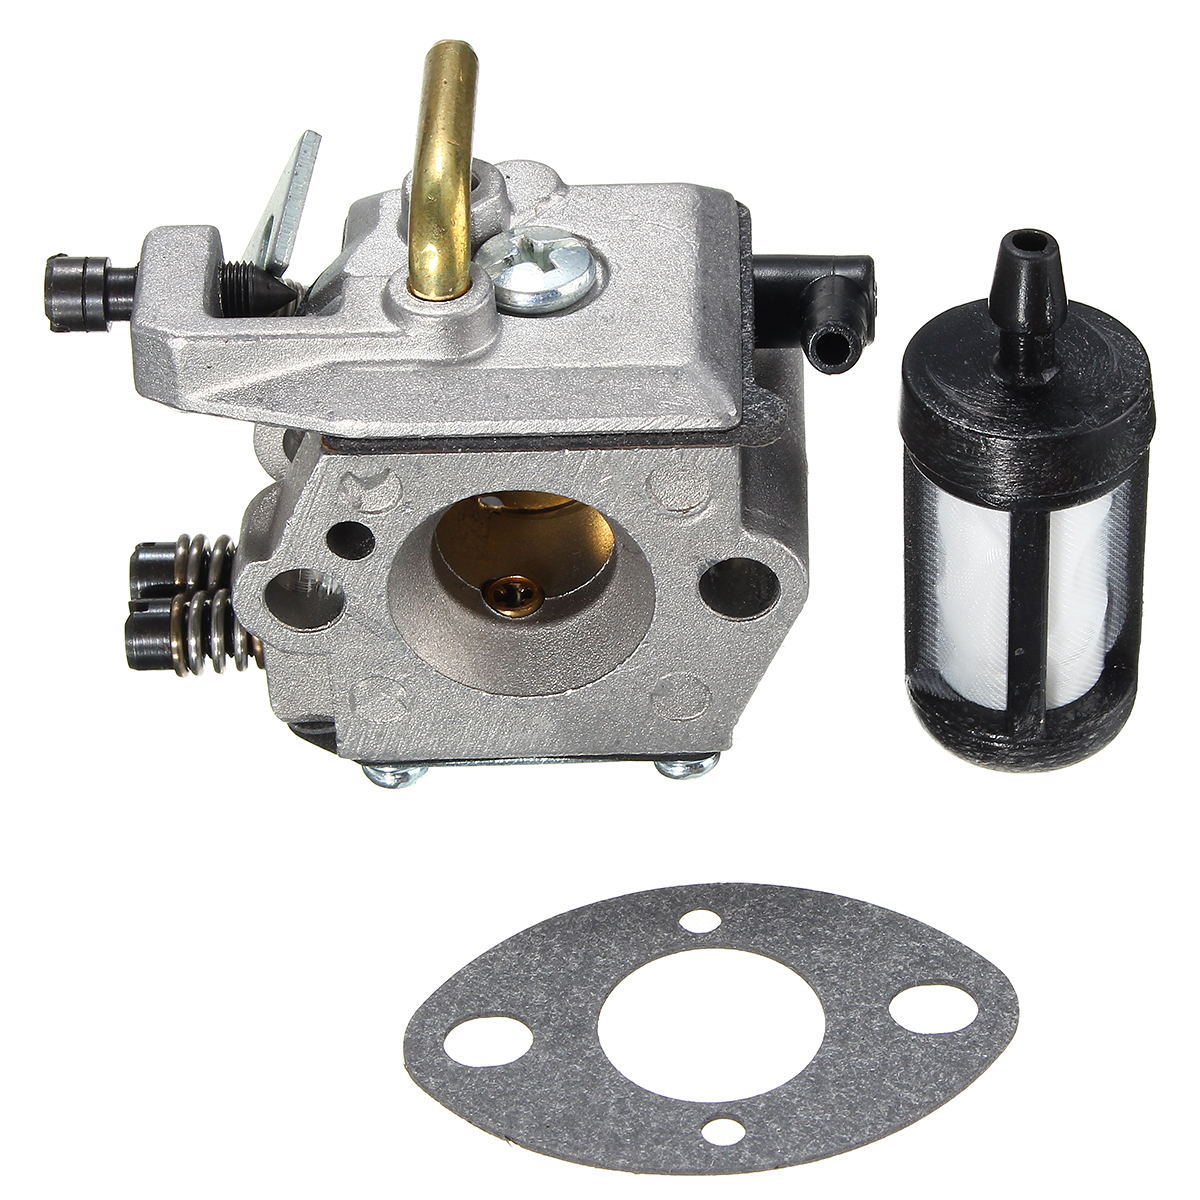 Carburetor Carb With Filter For Stihl MS260 MS240 024AV 024S Walbro WT194